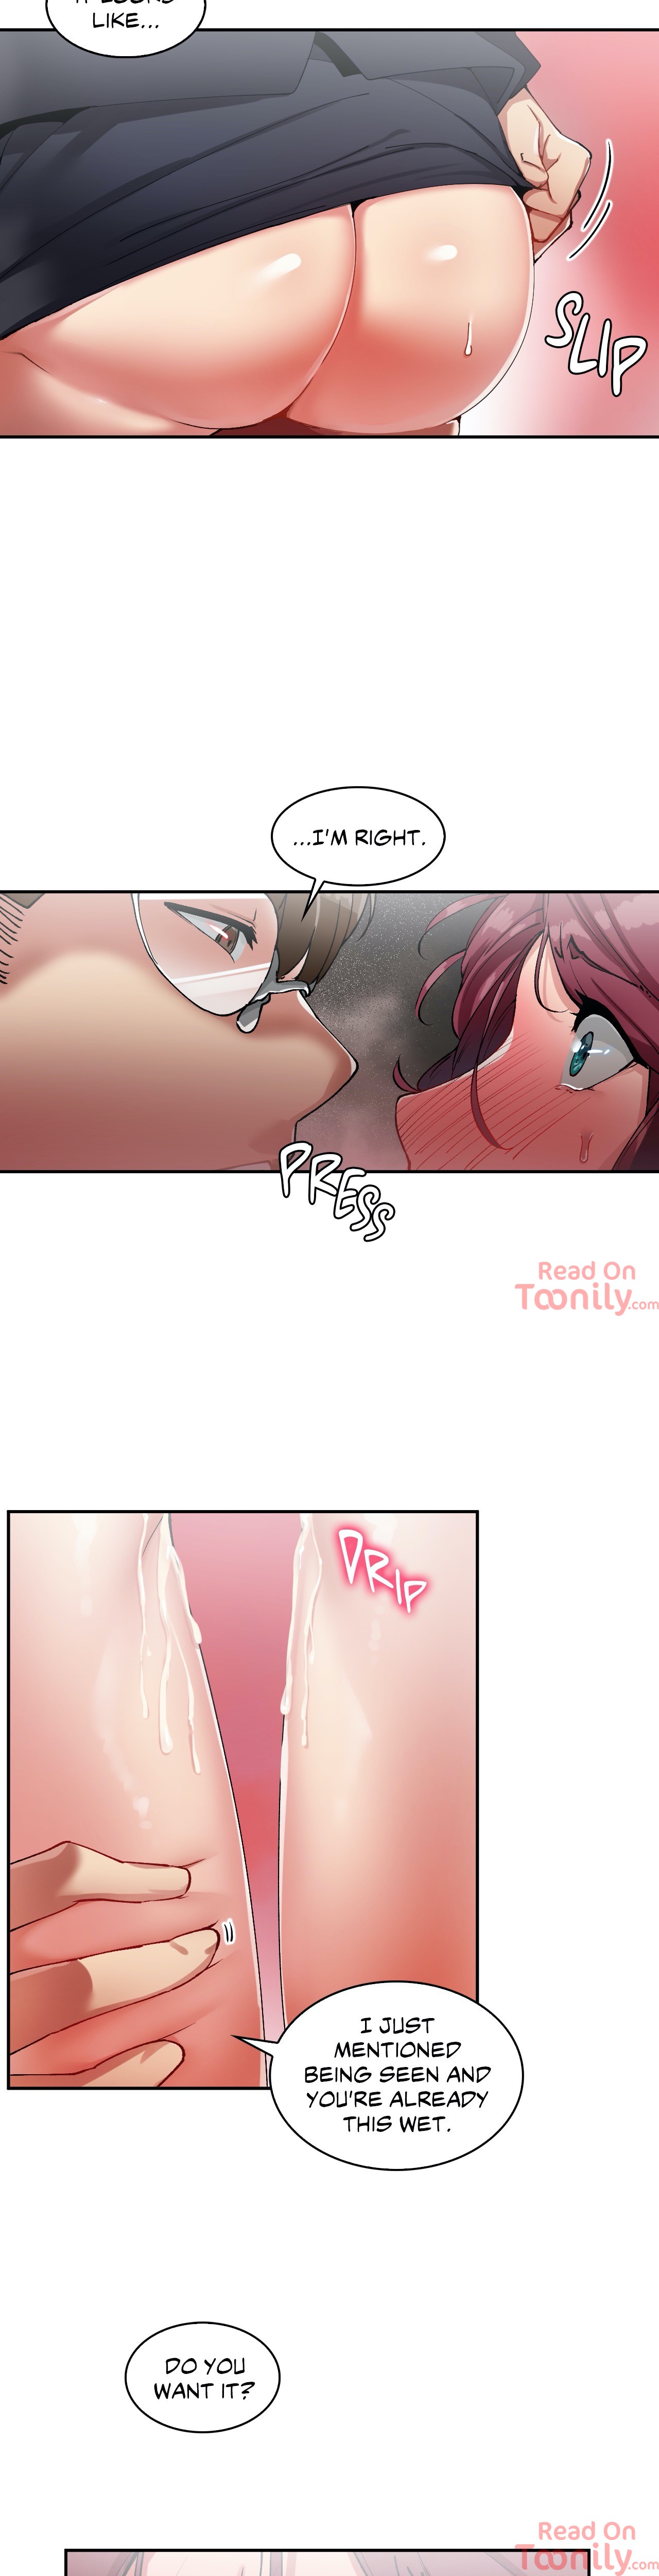 The Girl Hiding in the Wall - Chapter 17 Page 10